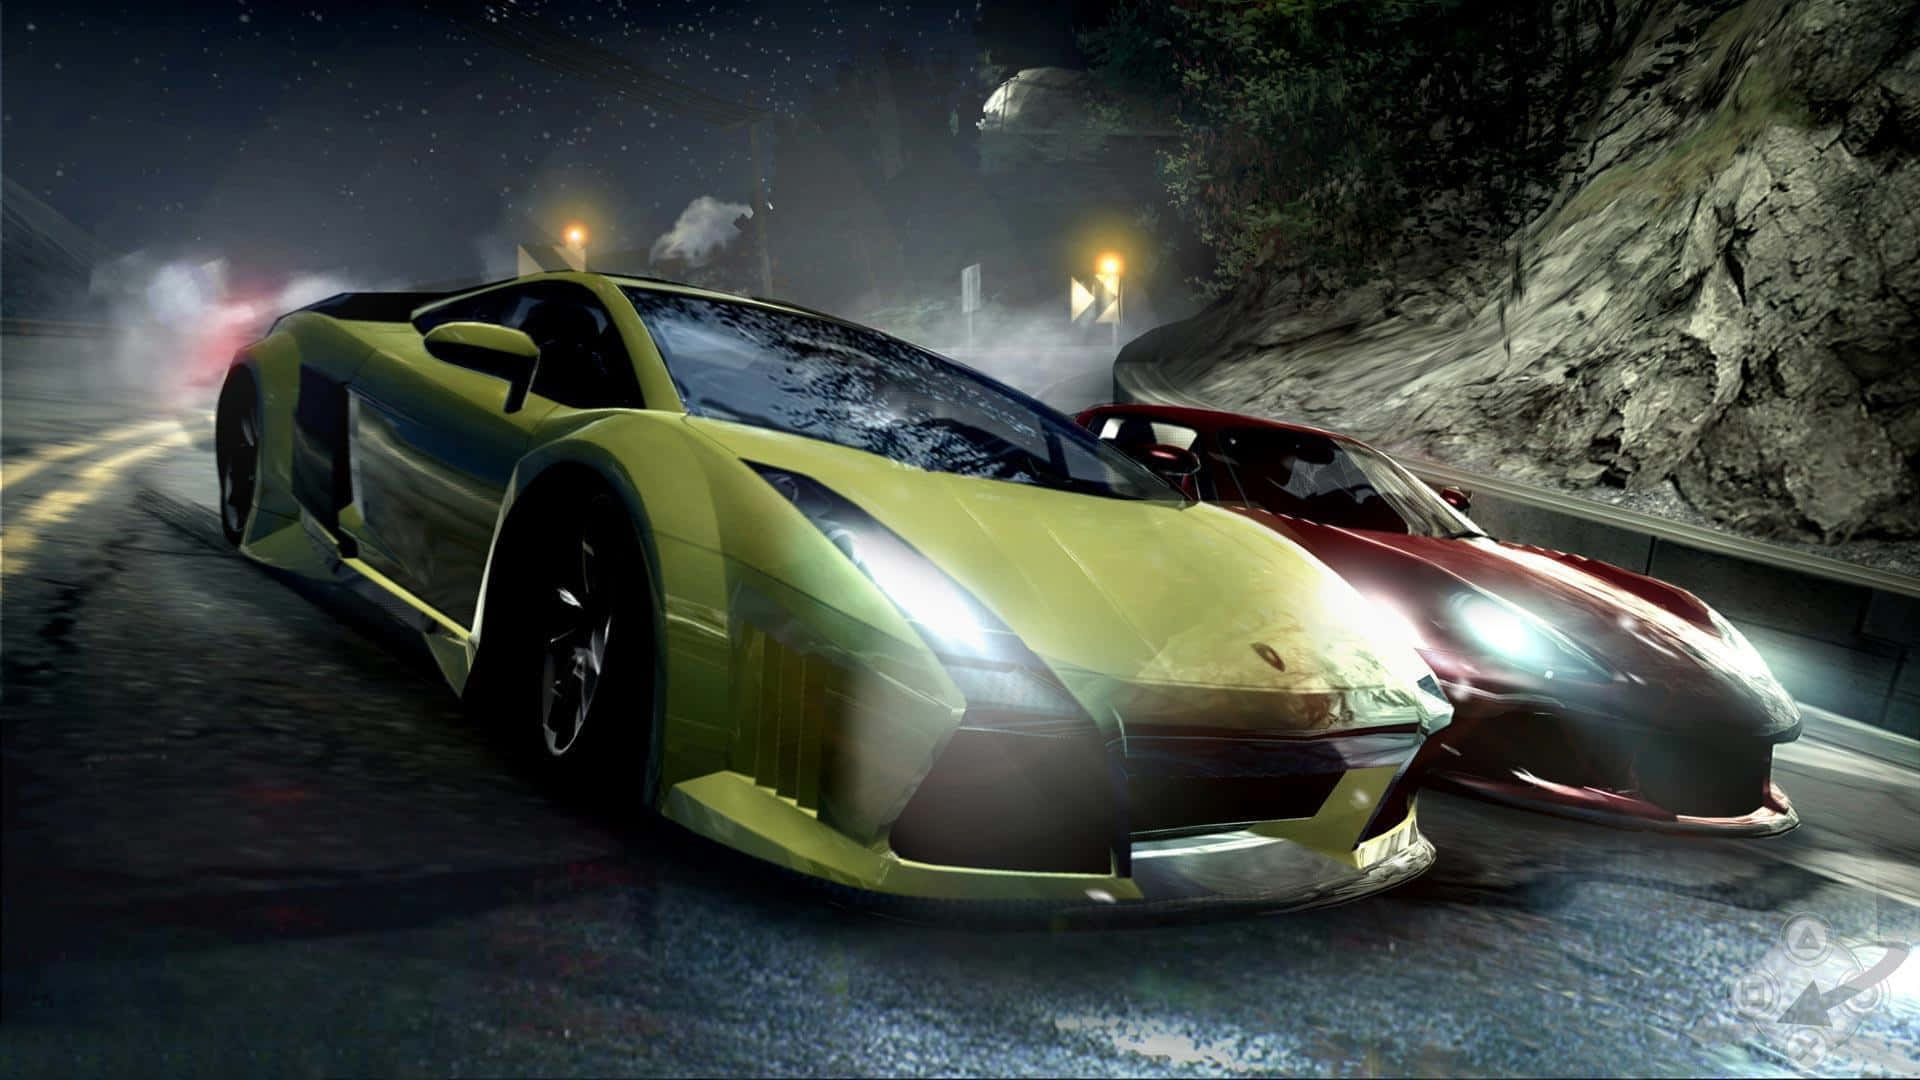 Nfs Most Wanted Mobile Wallpaper  Need for speed, Need for speed